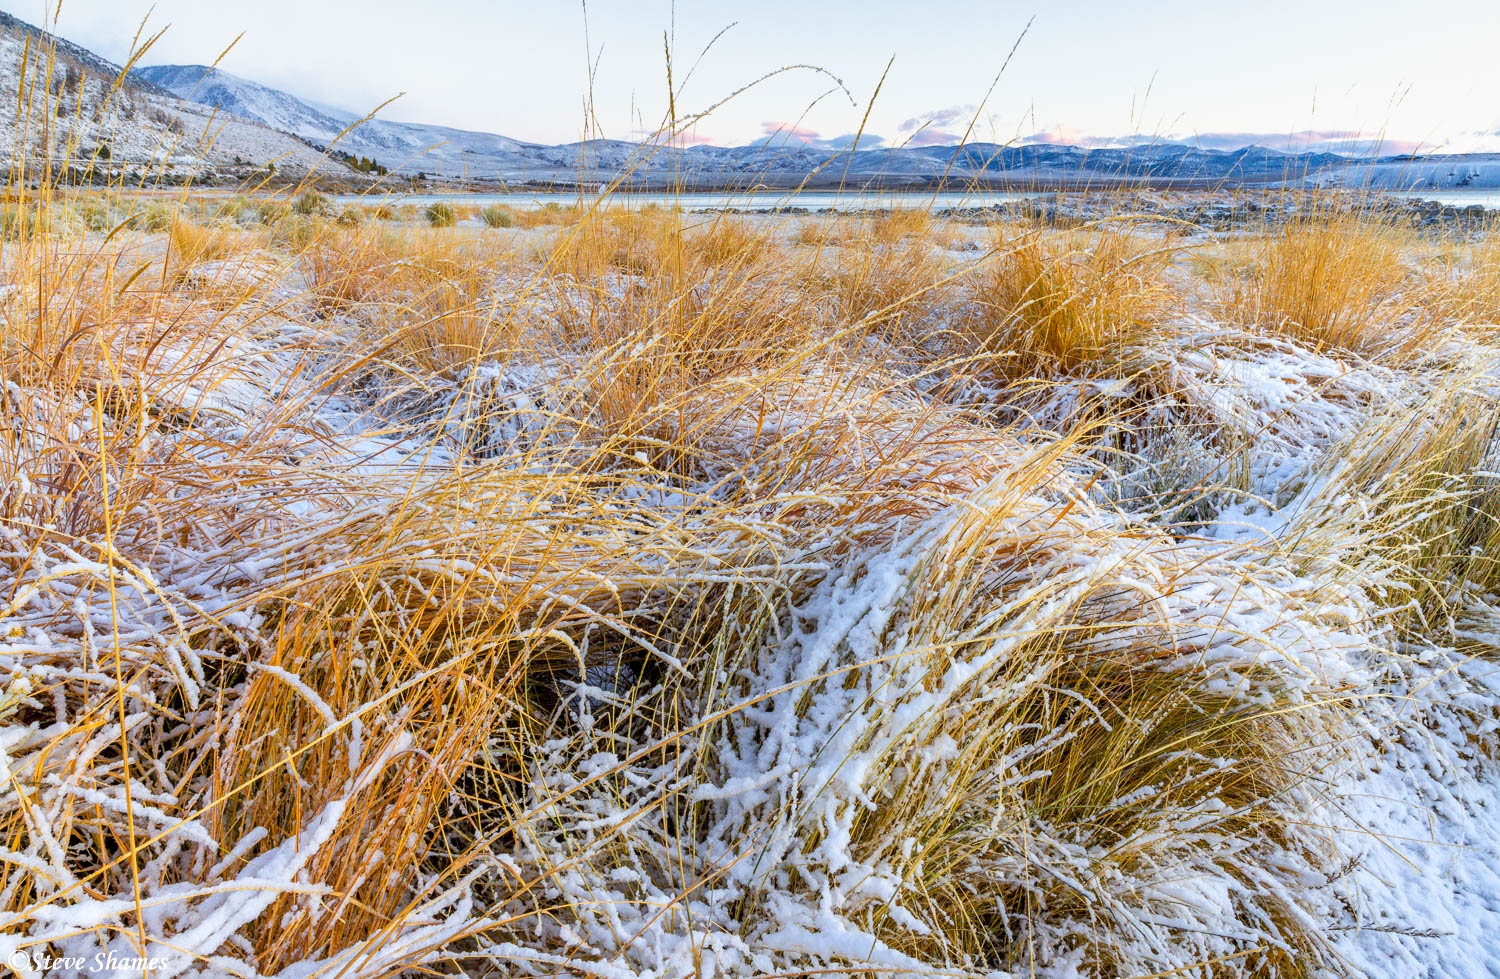 I liked the way the snow looked on the tall grass in the mellow light, before the sunlight hit it.